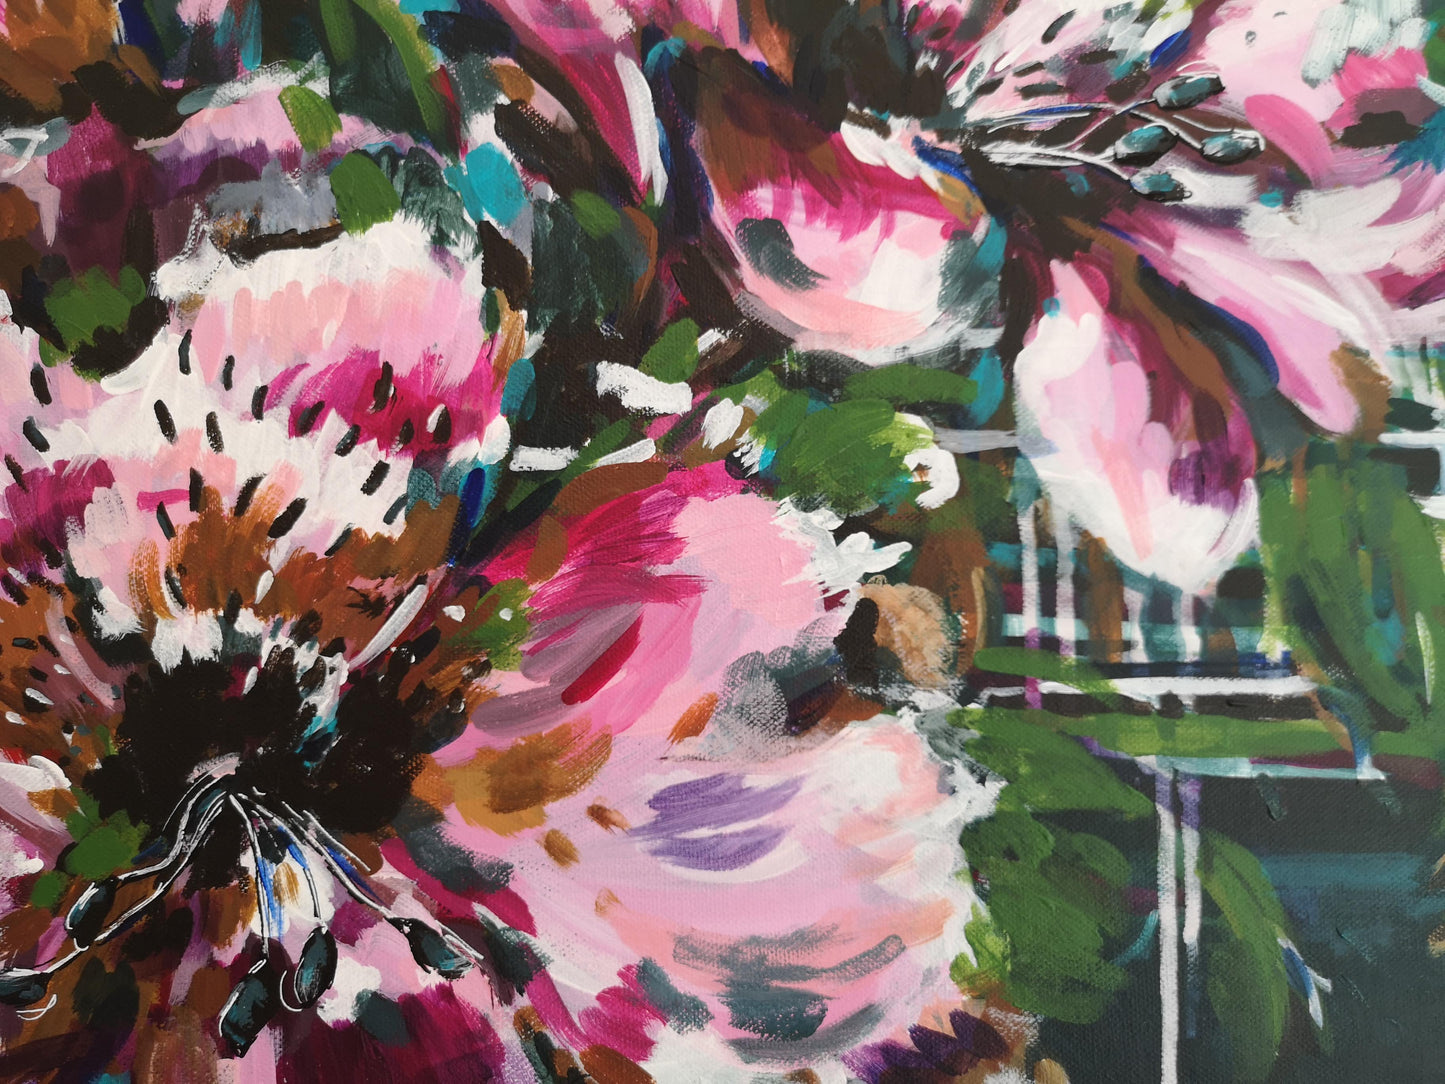 Floral close up details of colourful abstract painting by Judy Century. Expressive pinks, whites, blues and browns.